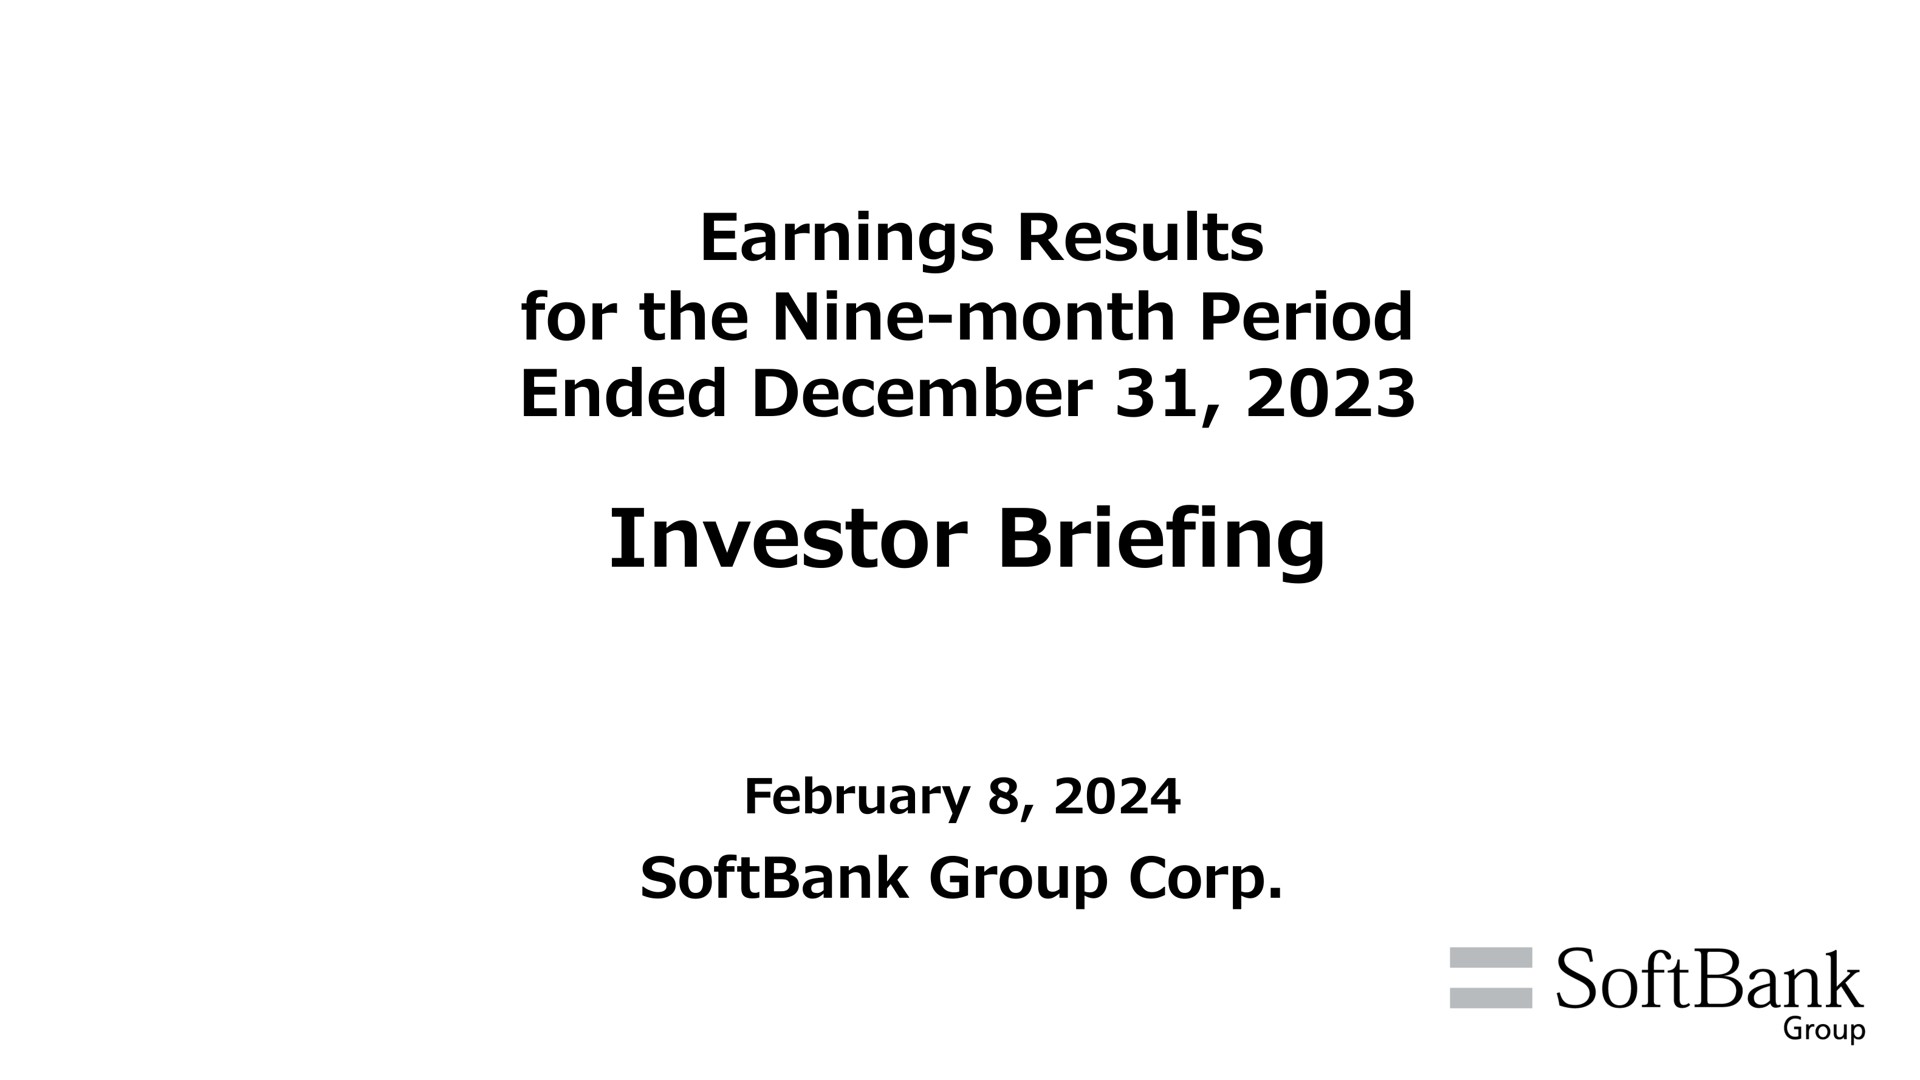 earnings results for the nine month period ended investor briefing group corp | SoftBank